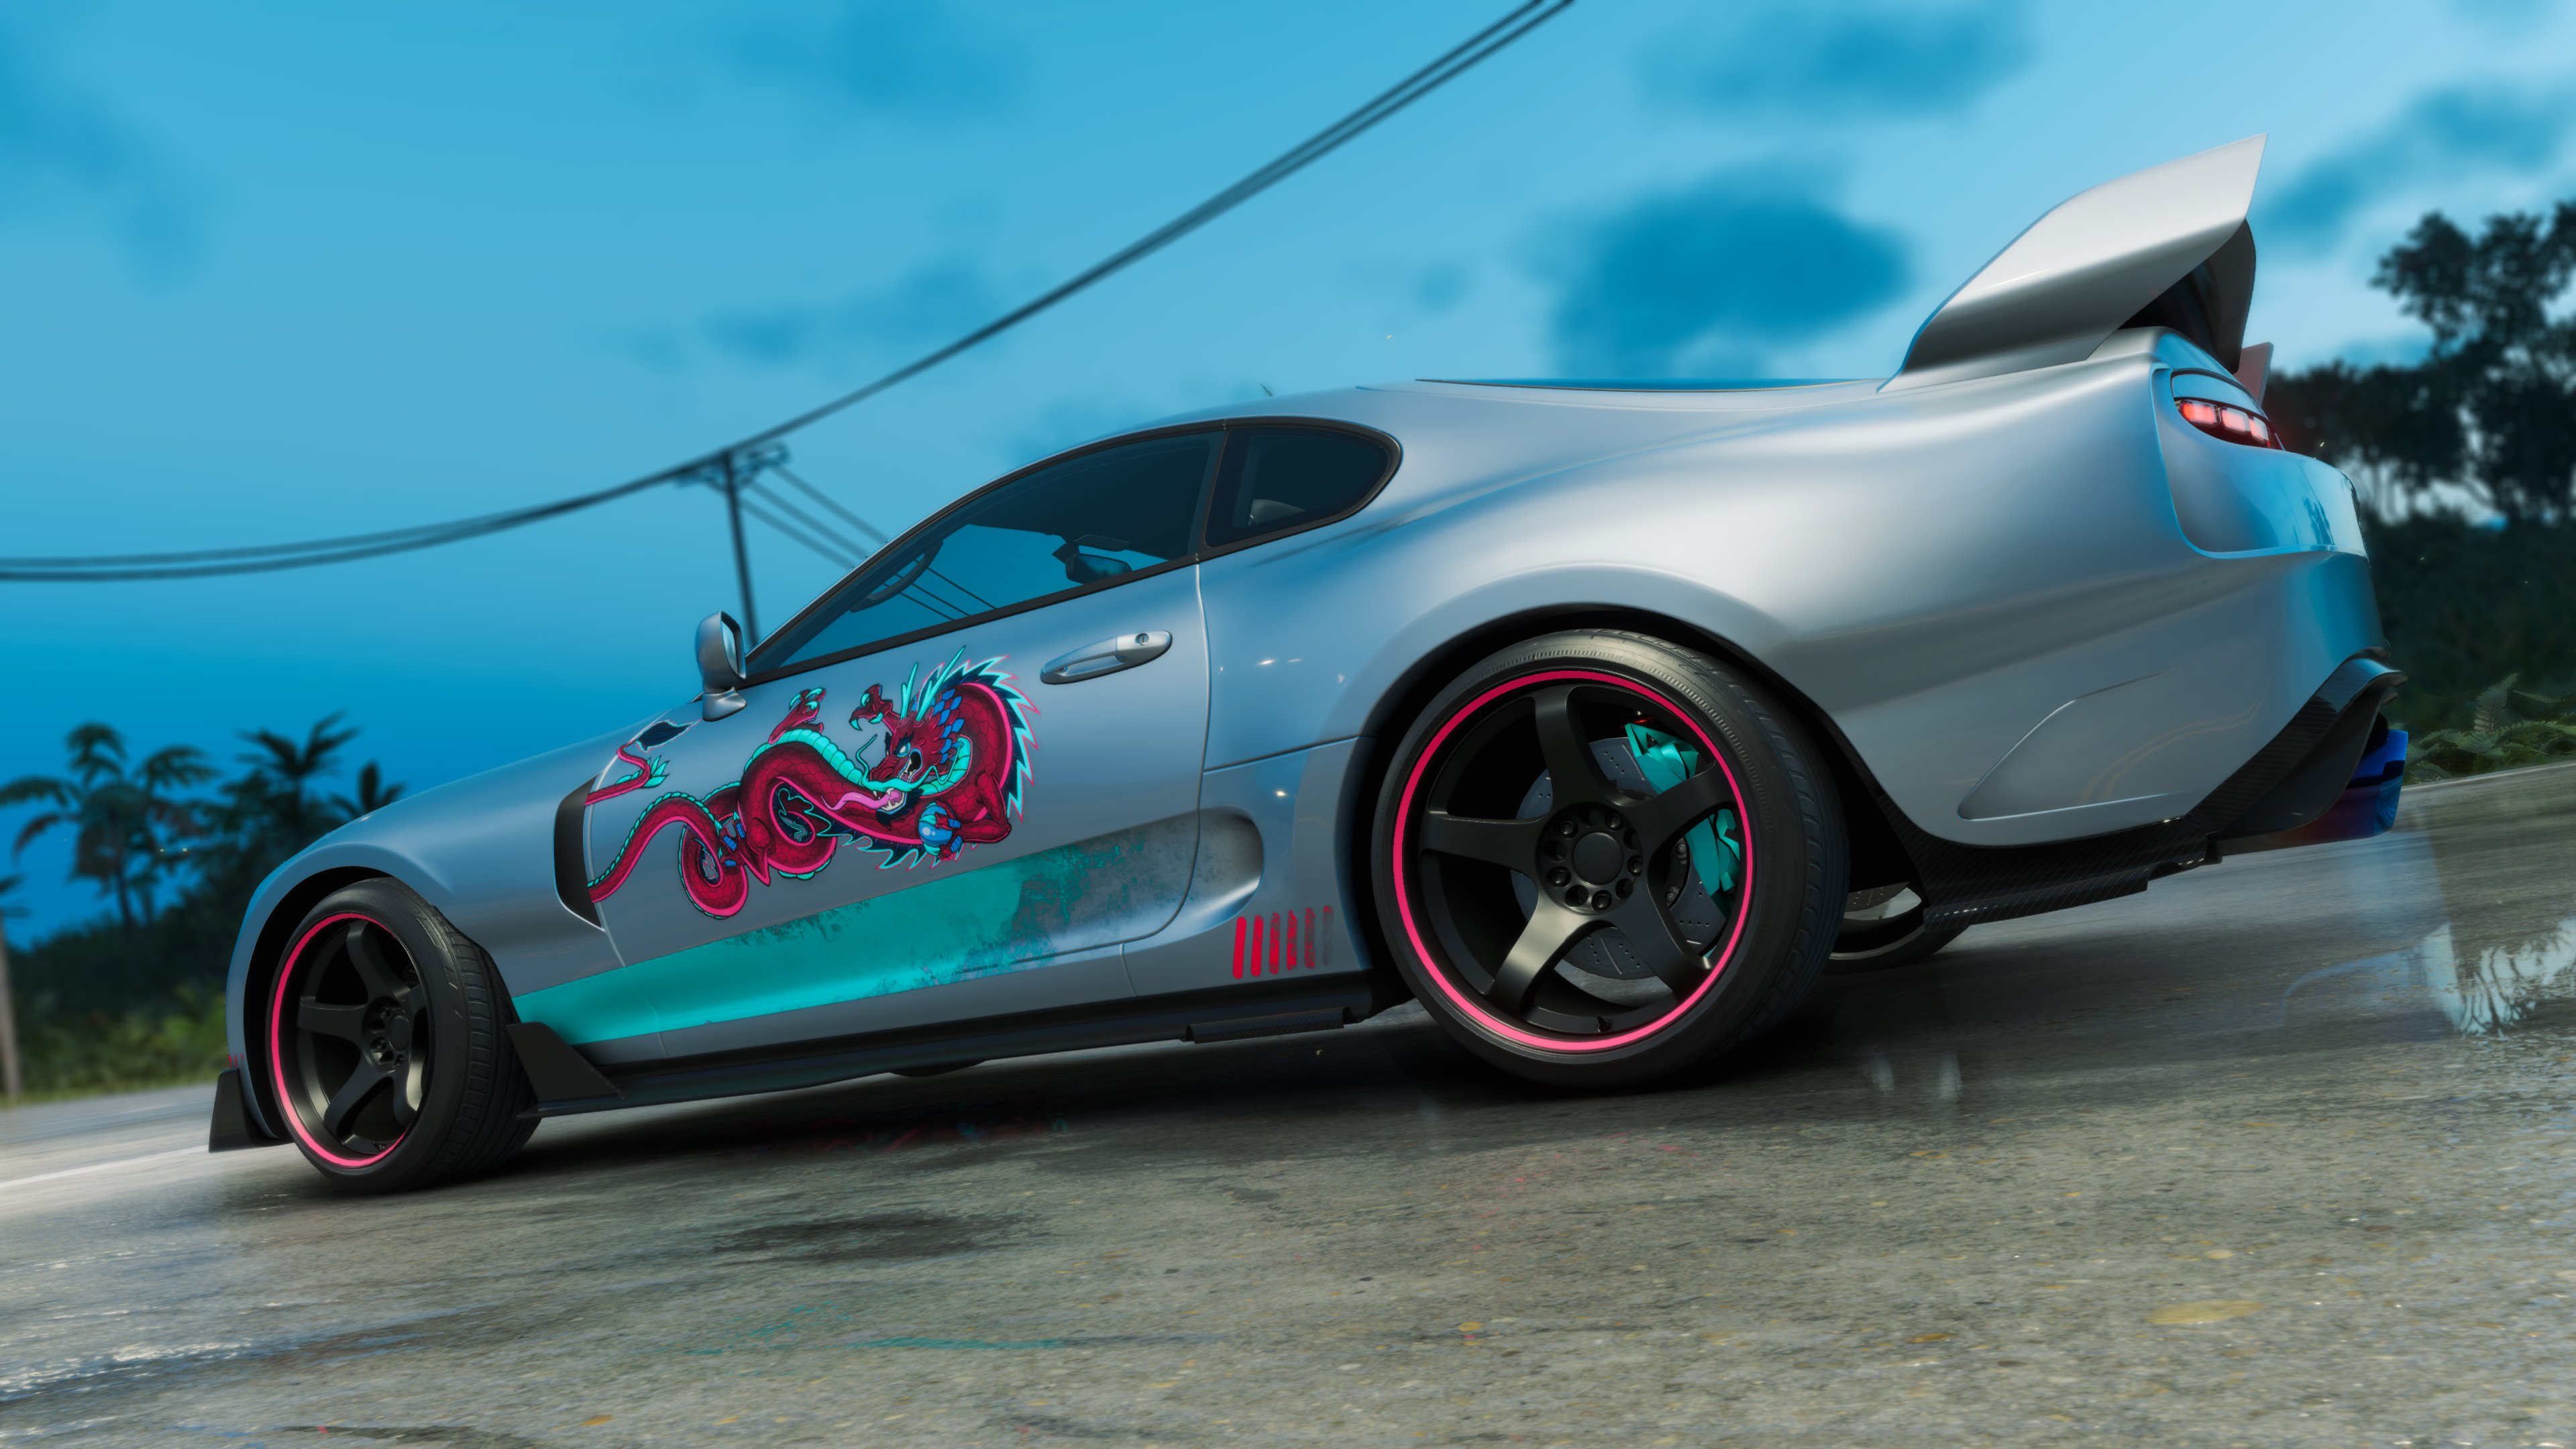 General 3840x2160 The Crew car Toyota Supra screen shot Hawaii night tuning CGI video game art vehicle side view taillights reflection sky clouds palm trees